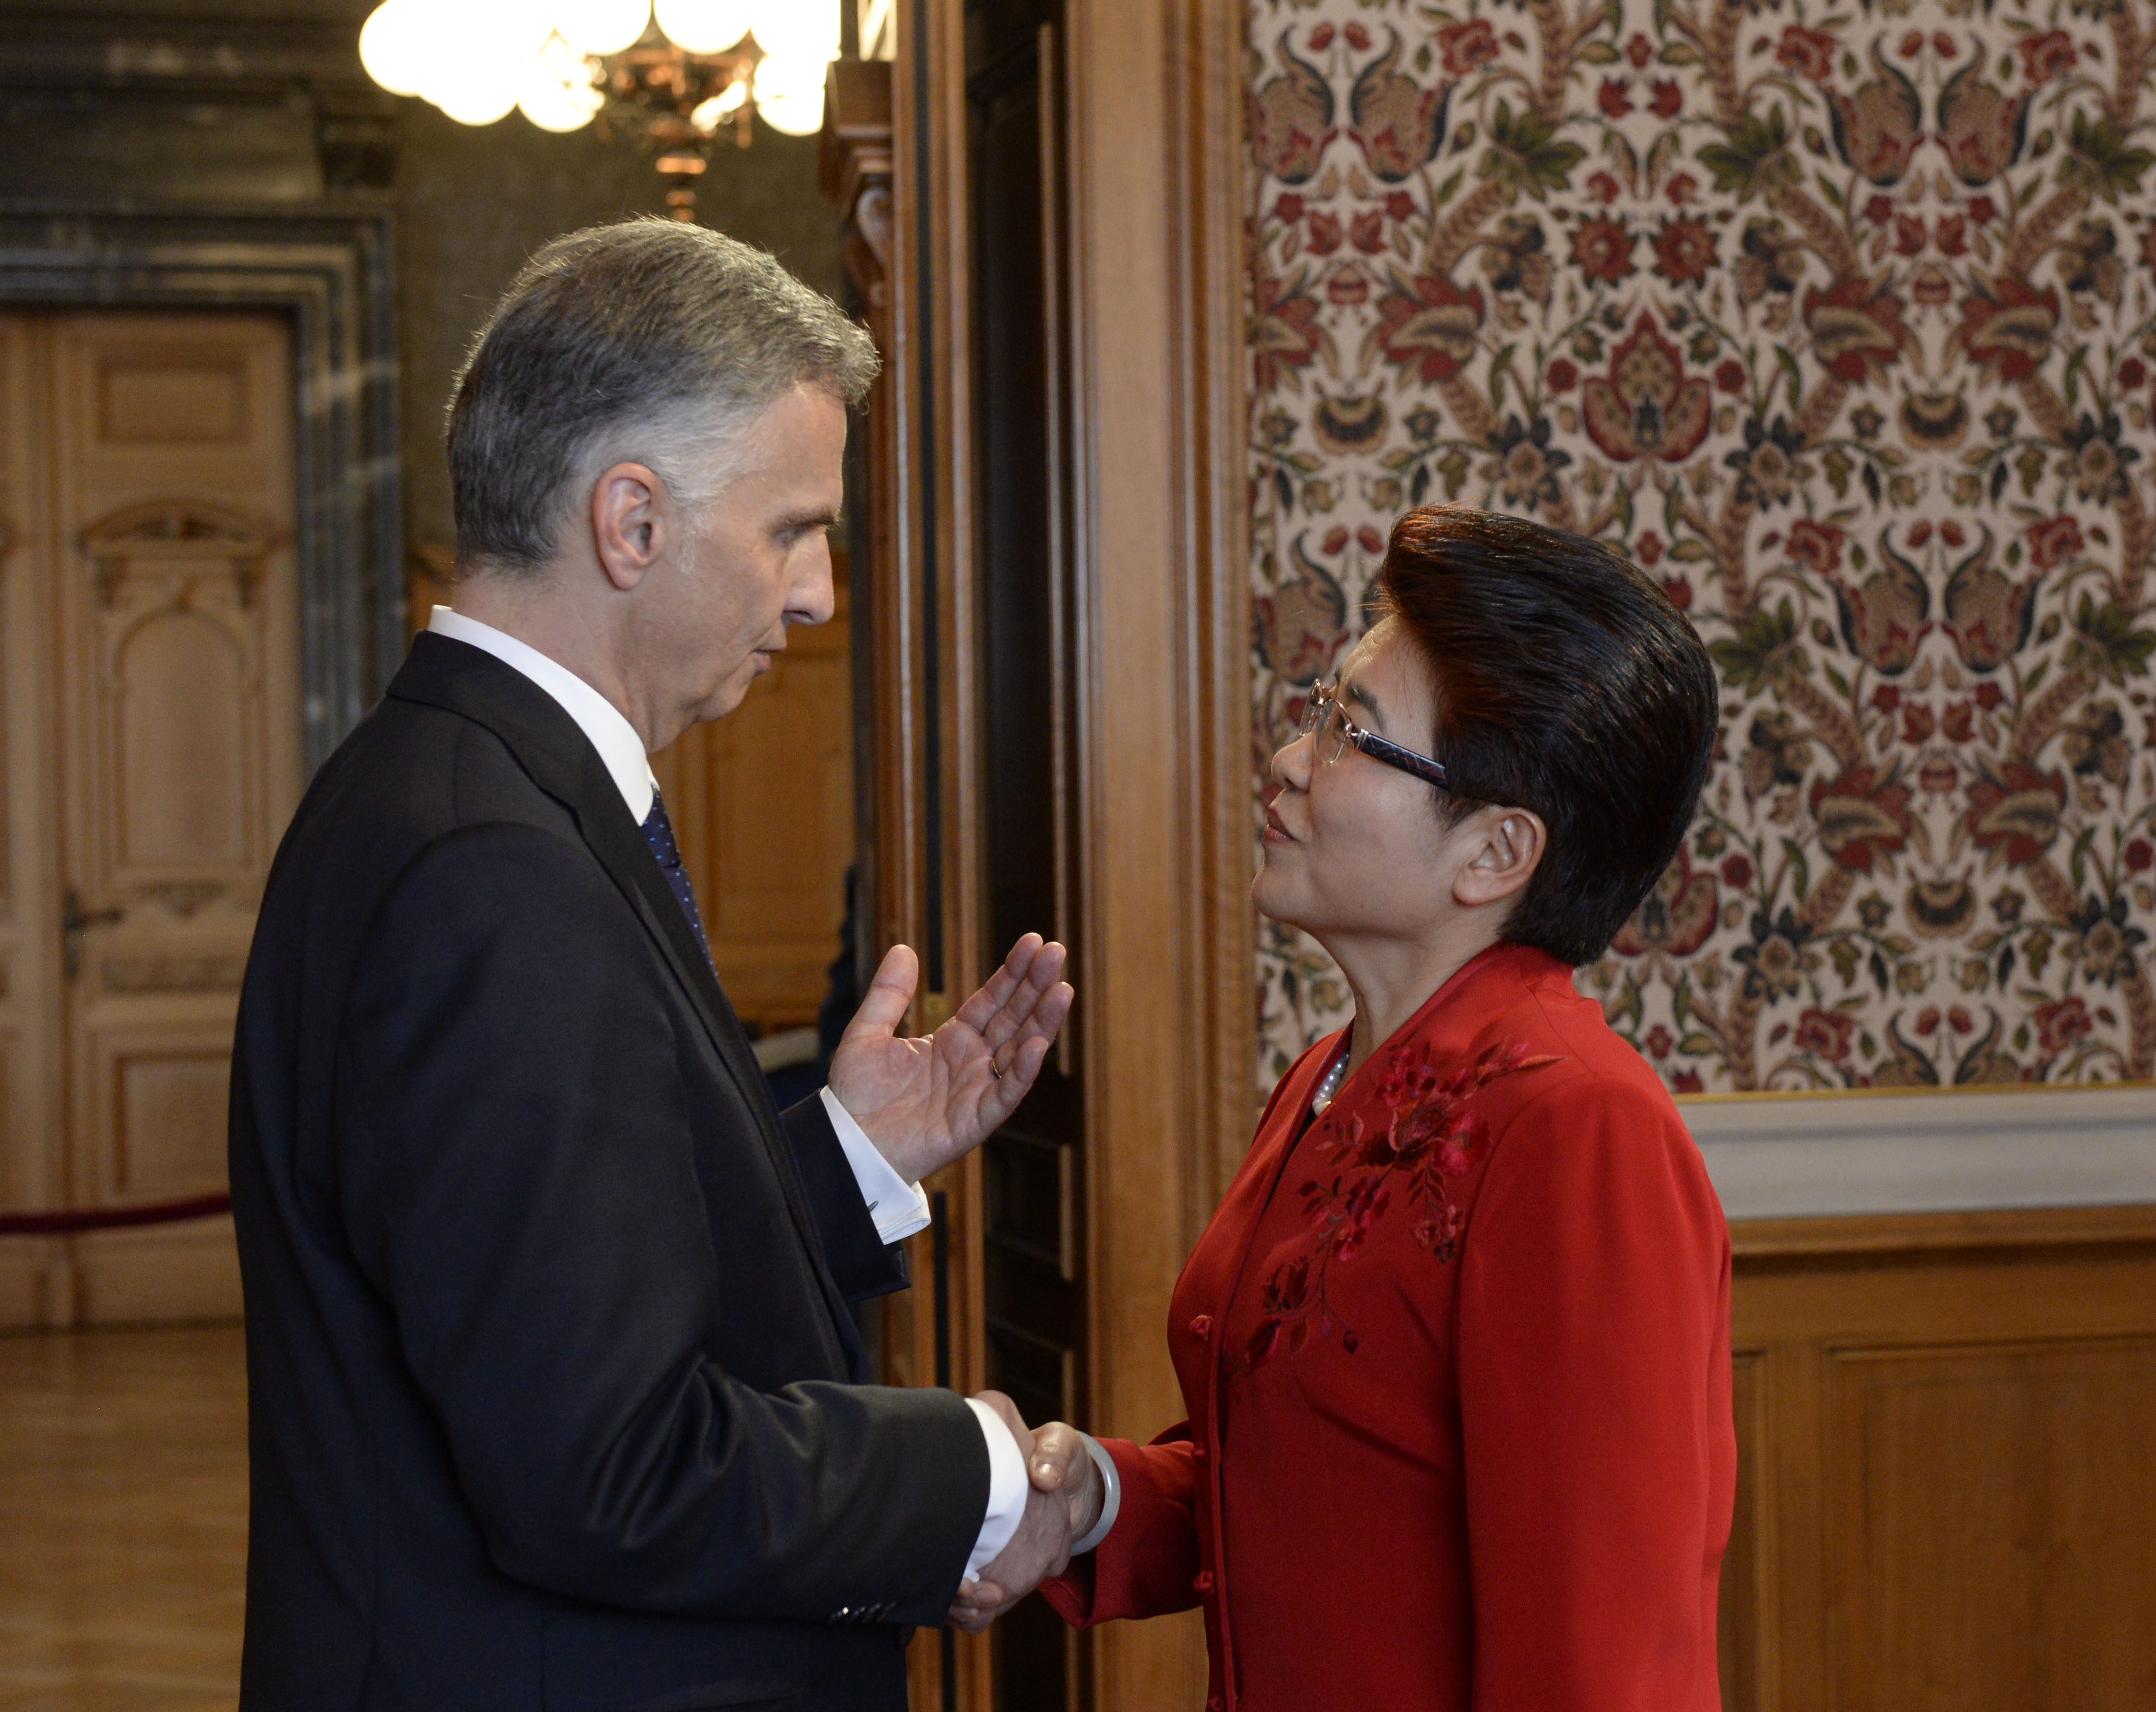 President of the Swiss Confederation, Didier Burkhalter, welcomes guests at the New Year’s reception in Bern.